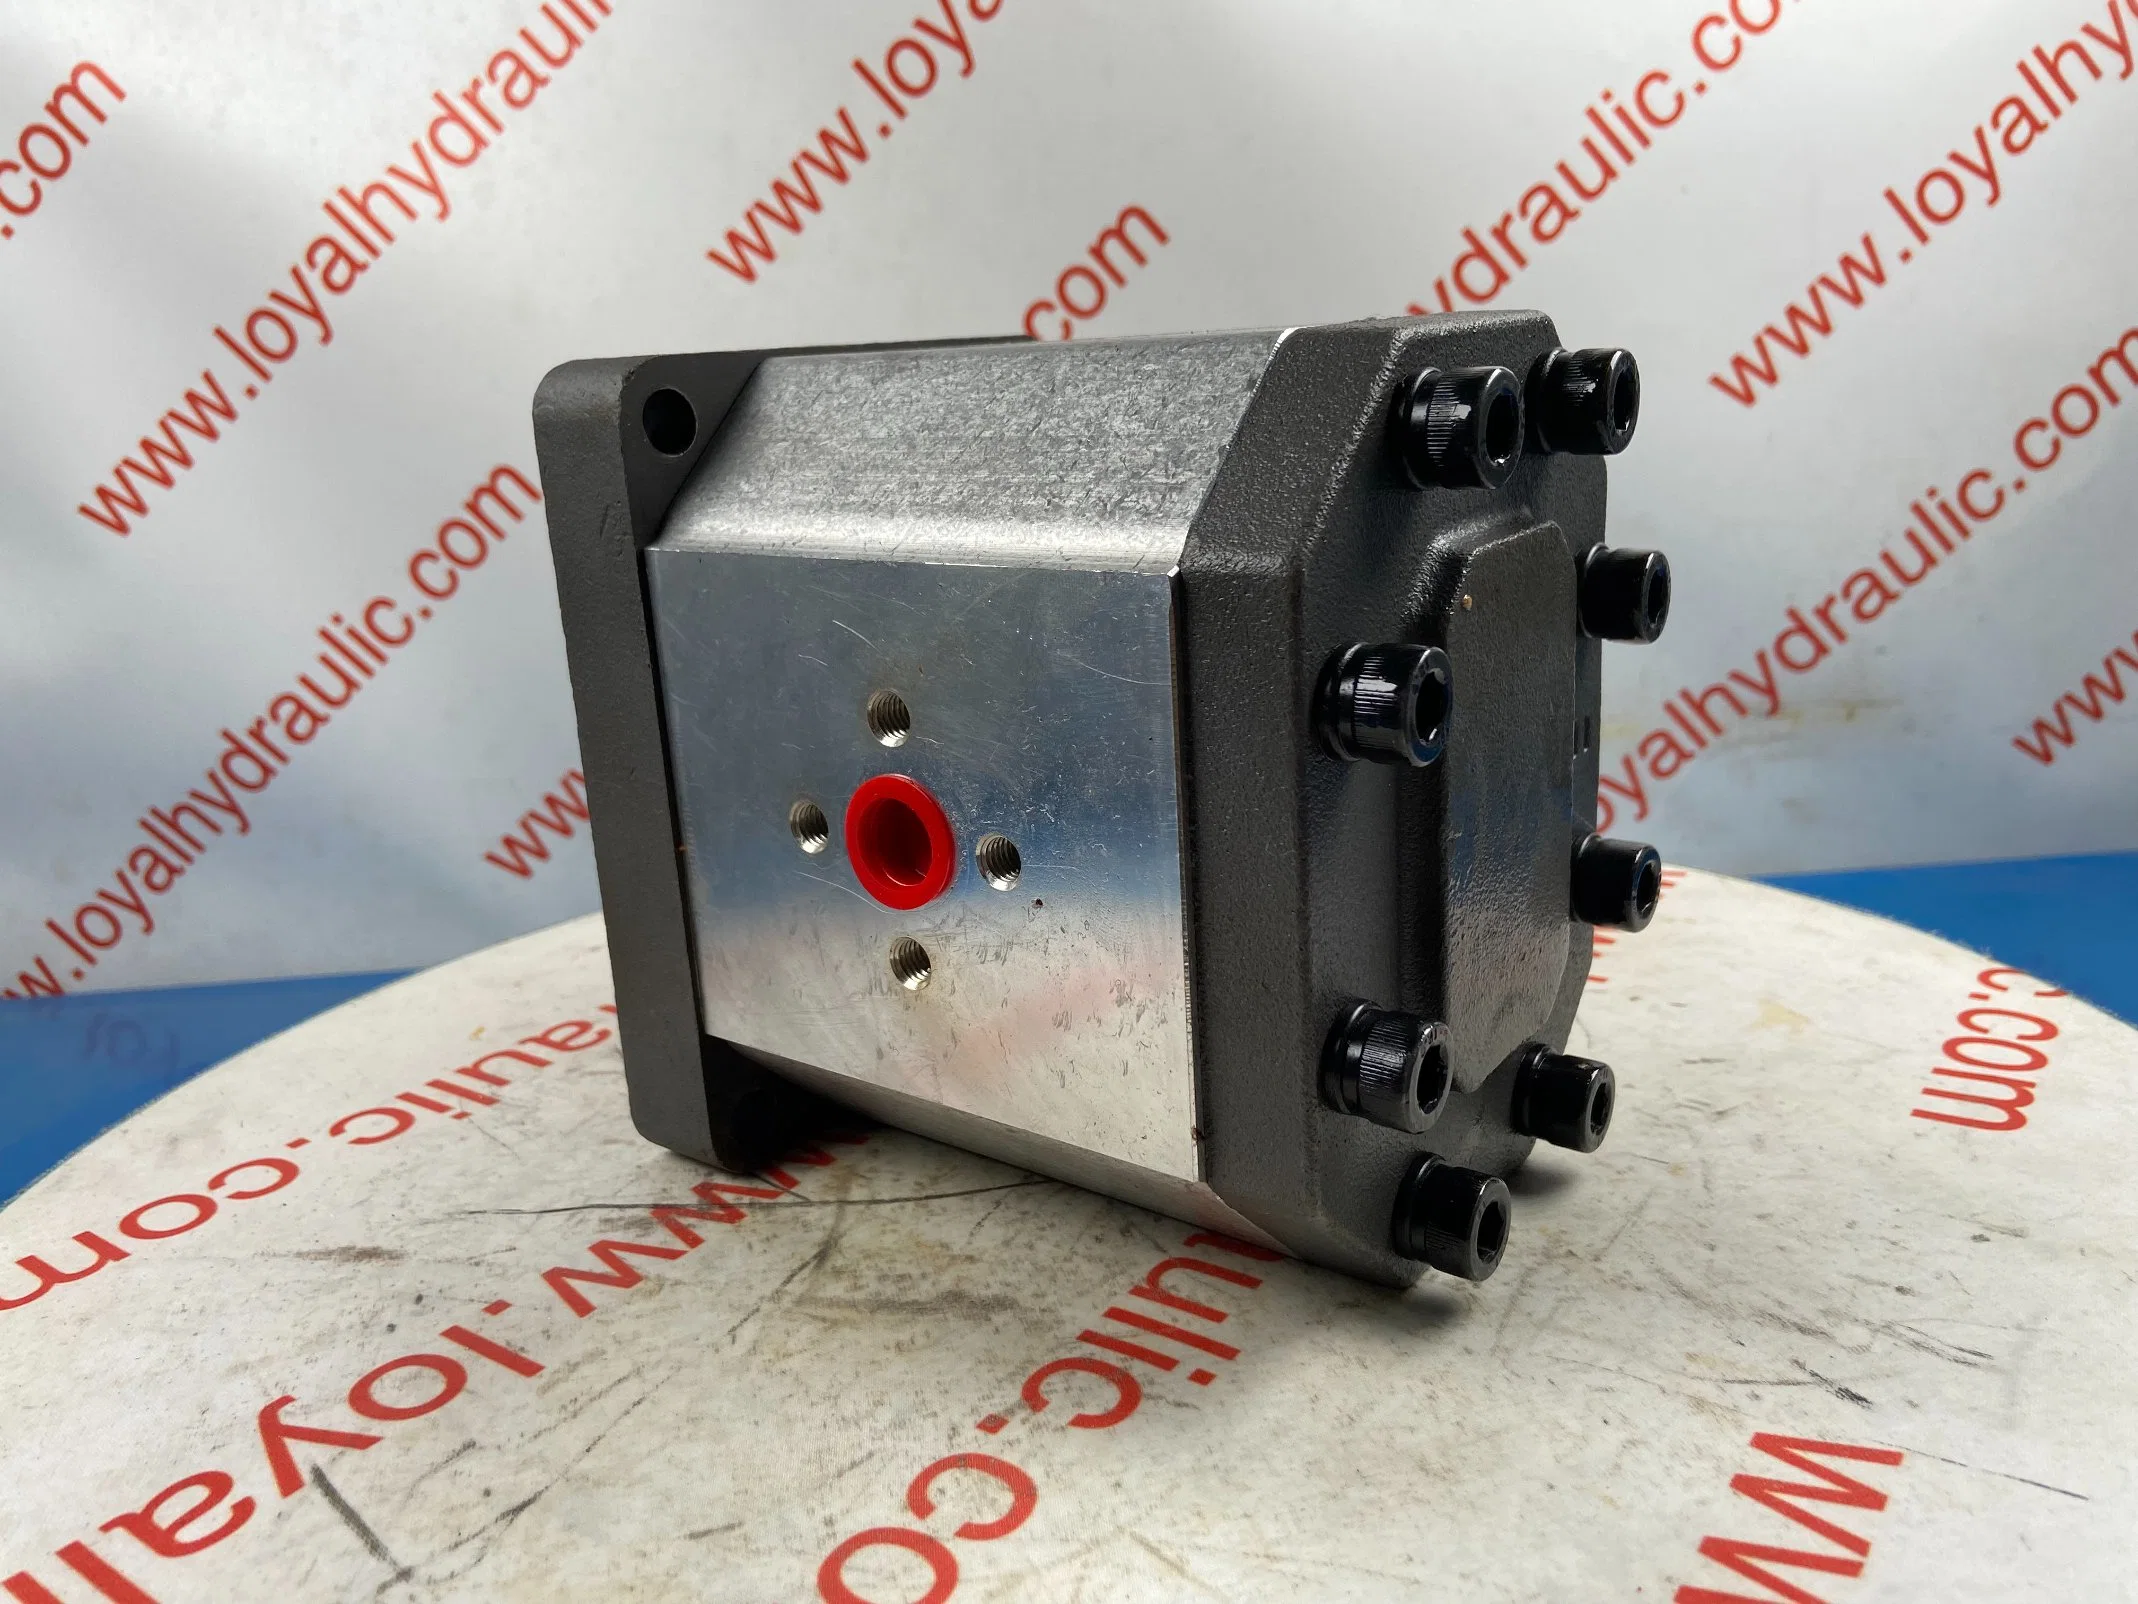 L-Caproni Hydraulic Gear Pump 20c19/20c22/20c25/20c28/20c32/20c36 for Forklift, Crawler Excavator, Agricultural Machinery, Tractor Spare Parts